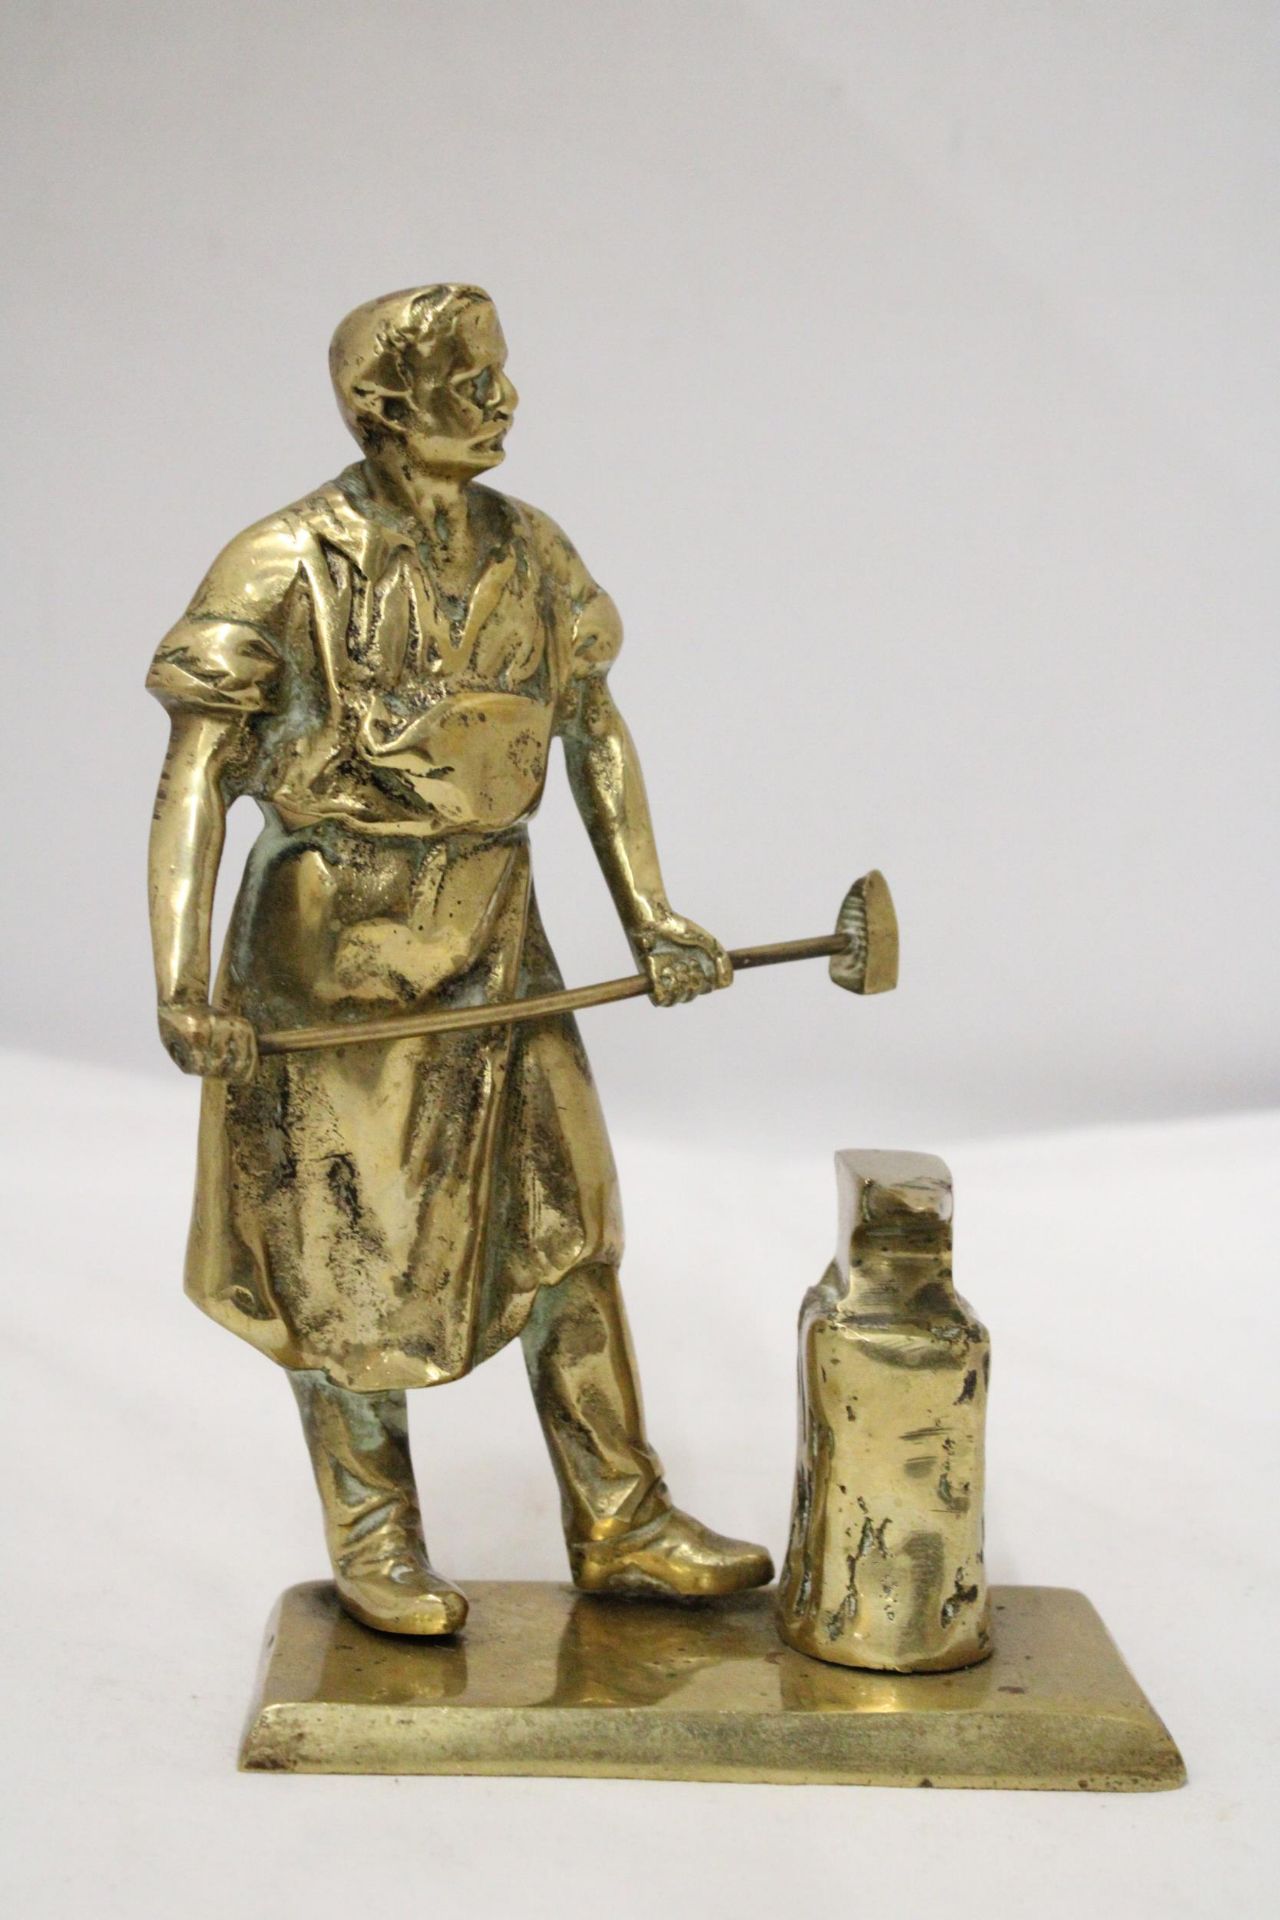 A HEAVY, SOLID, BRASS BLACKSMITH FIGURE, WEIGHS 4 KILOS, HEIGHT 20CM - Image 2 of 5